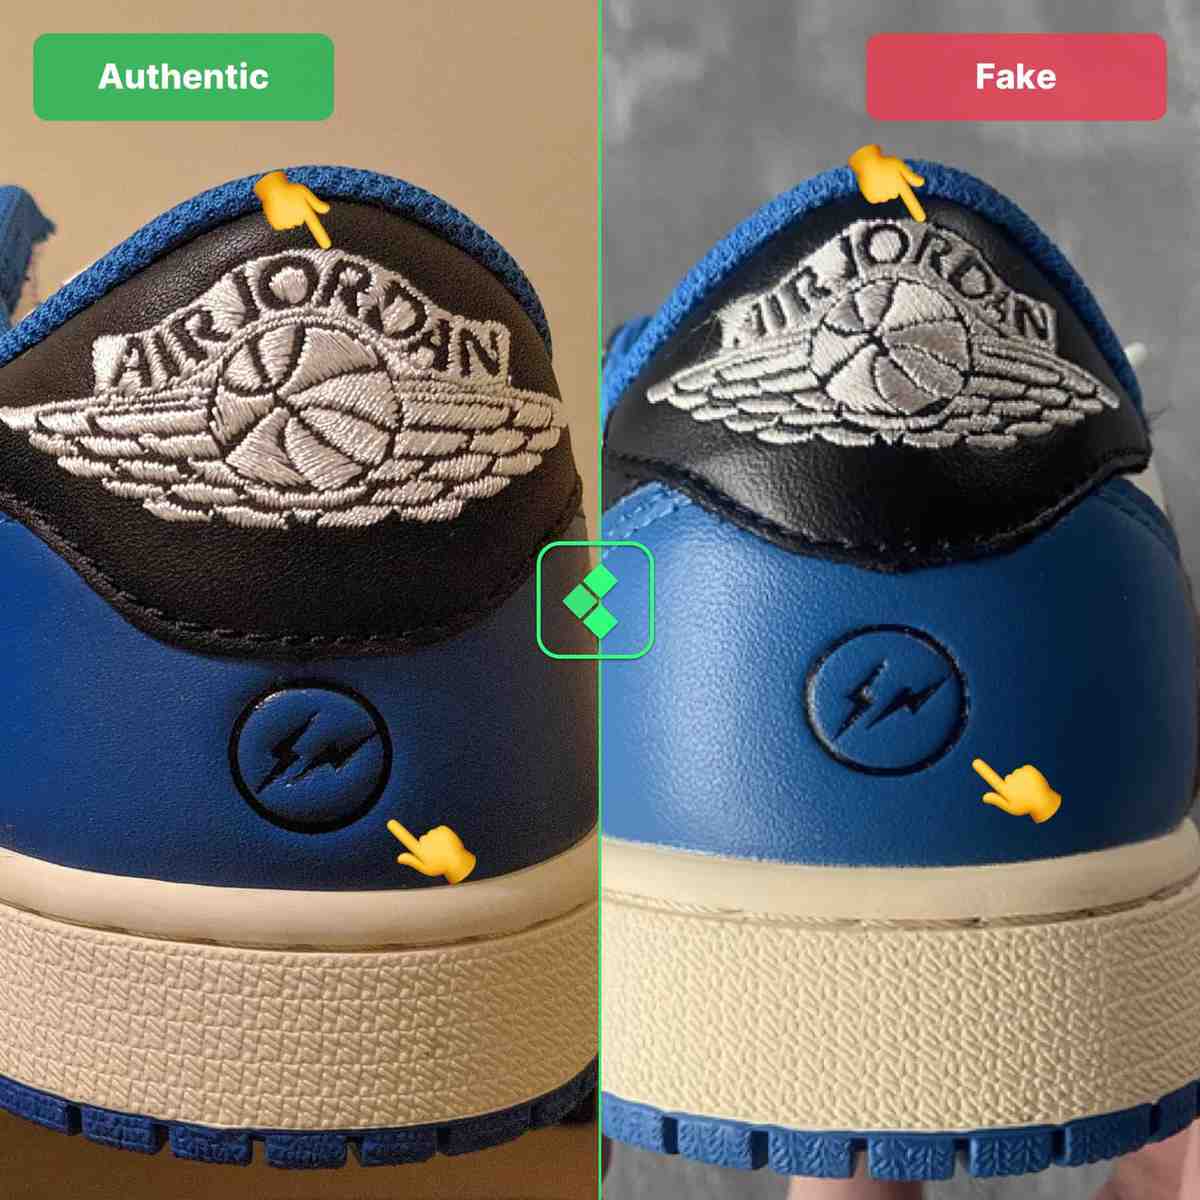 Travis Scott X Fragment Air Jordan 1 Low Fake Vs Real Guide How To Spot Fakes In 21 Legit Check By Ch